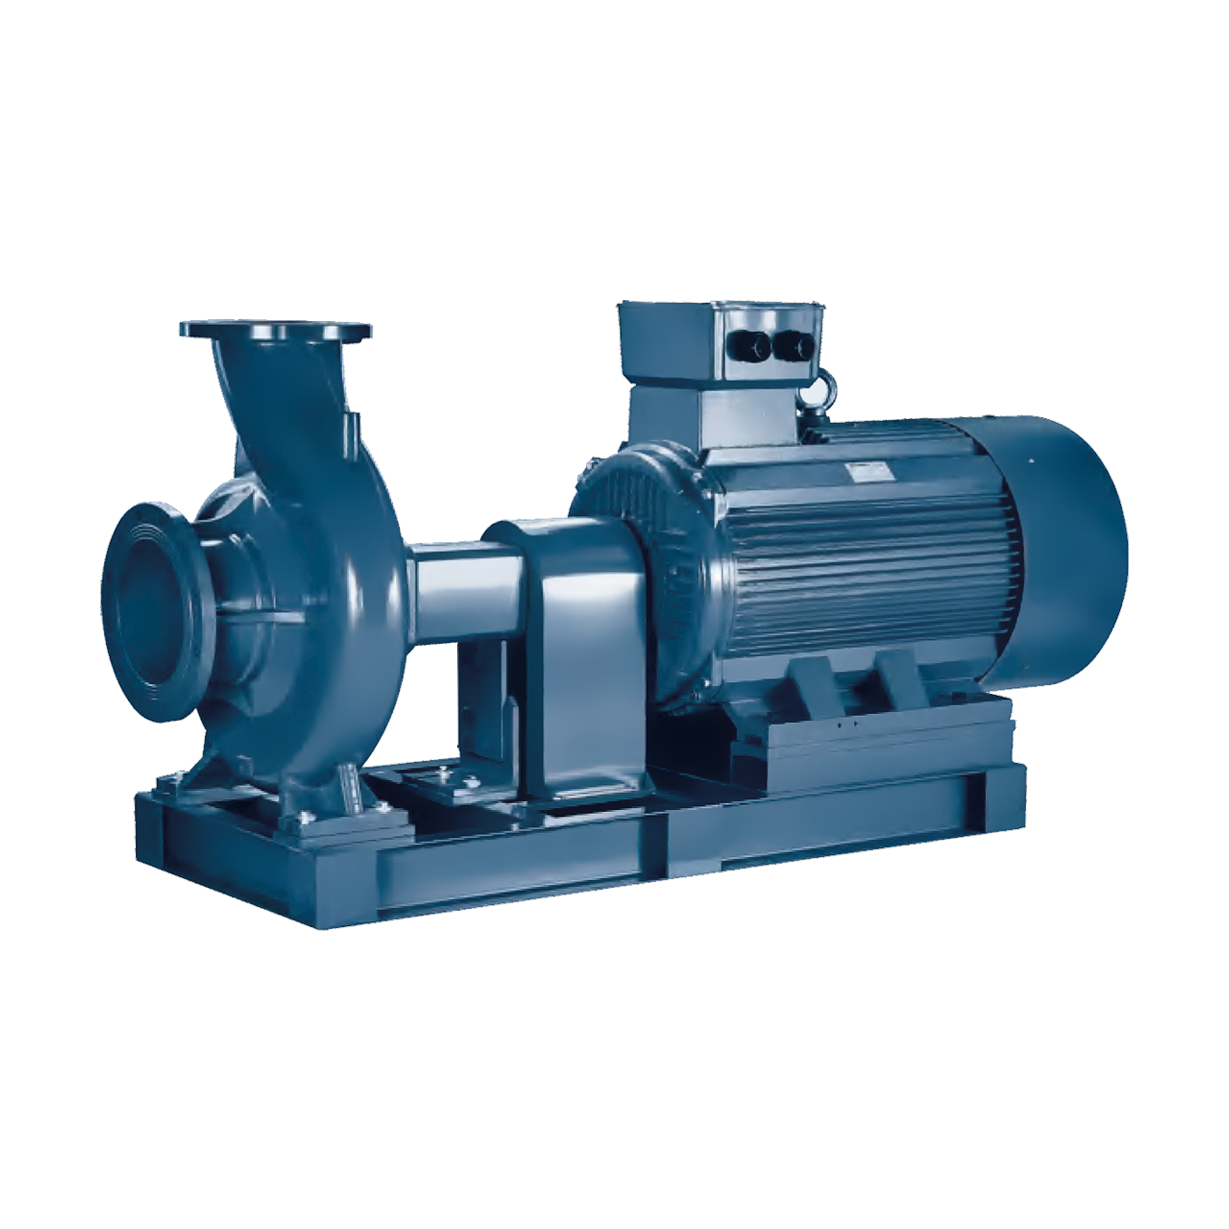 Horizontal Industrial Standard Centrifugal Pump with High Pressure